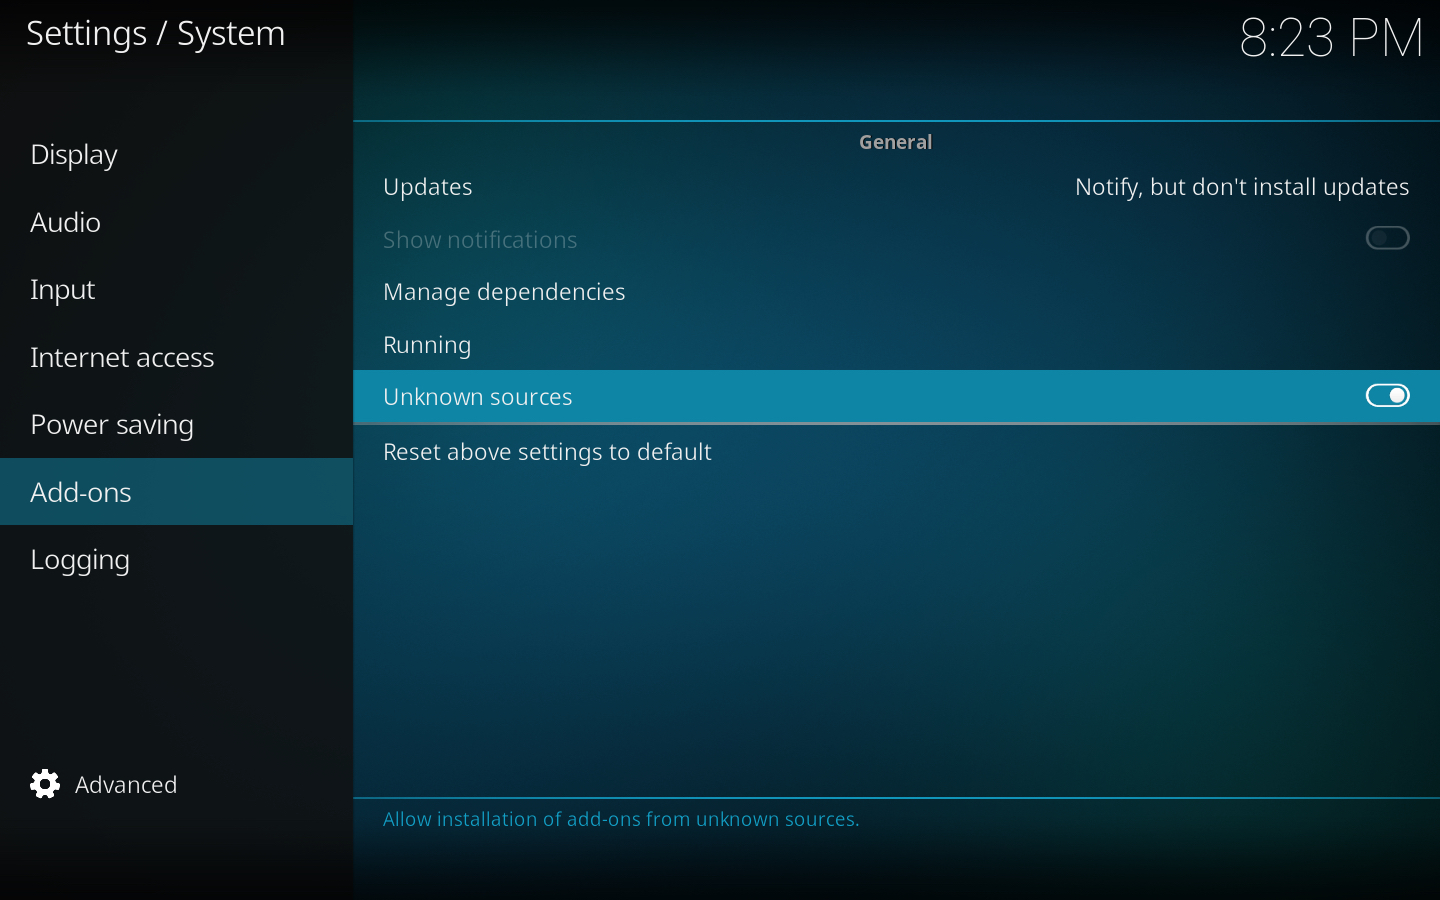 How to watch Netflix and other streaming services on Kodi? – RaspberryTips